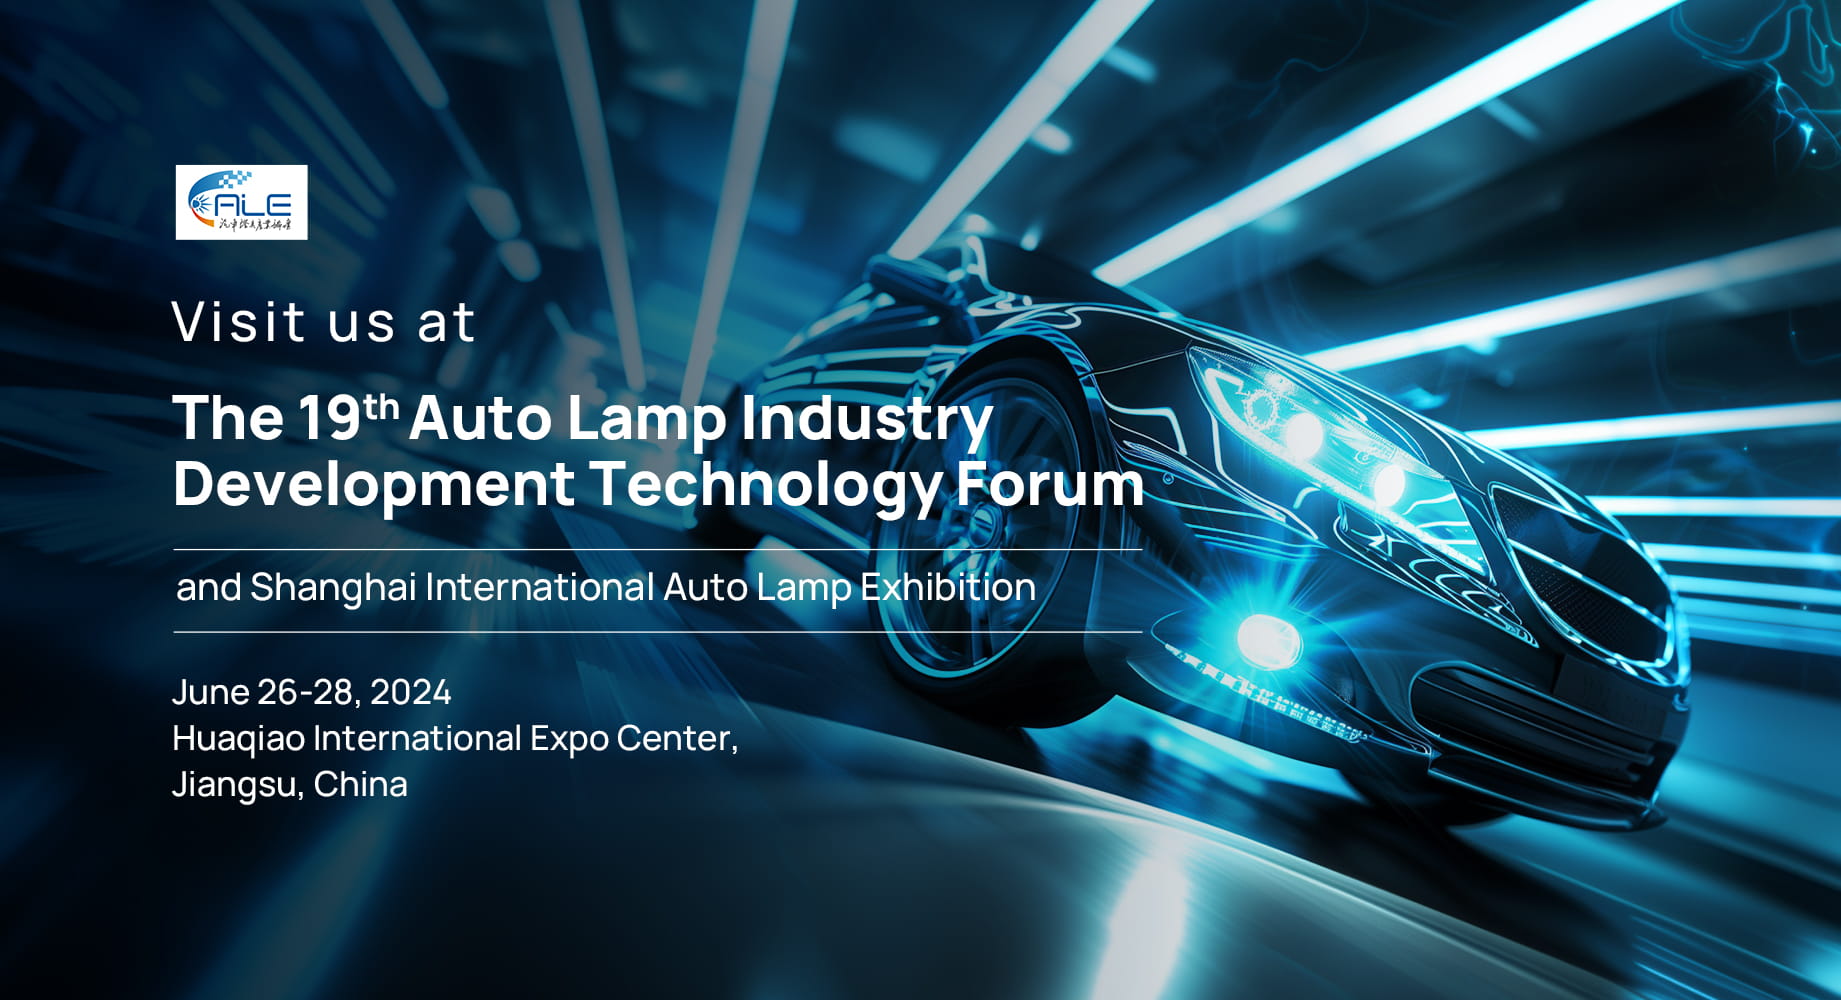 Focuslight Will Be Exhibiting at The 19th Auto Lamp Industry Development Technology Forum and Shanghai lnternational Auto Lamp Exhibition（ALE）